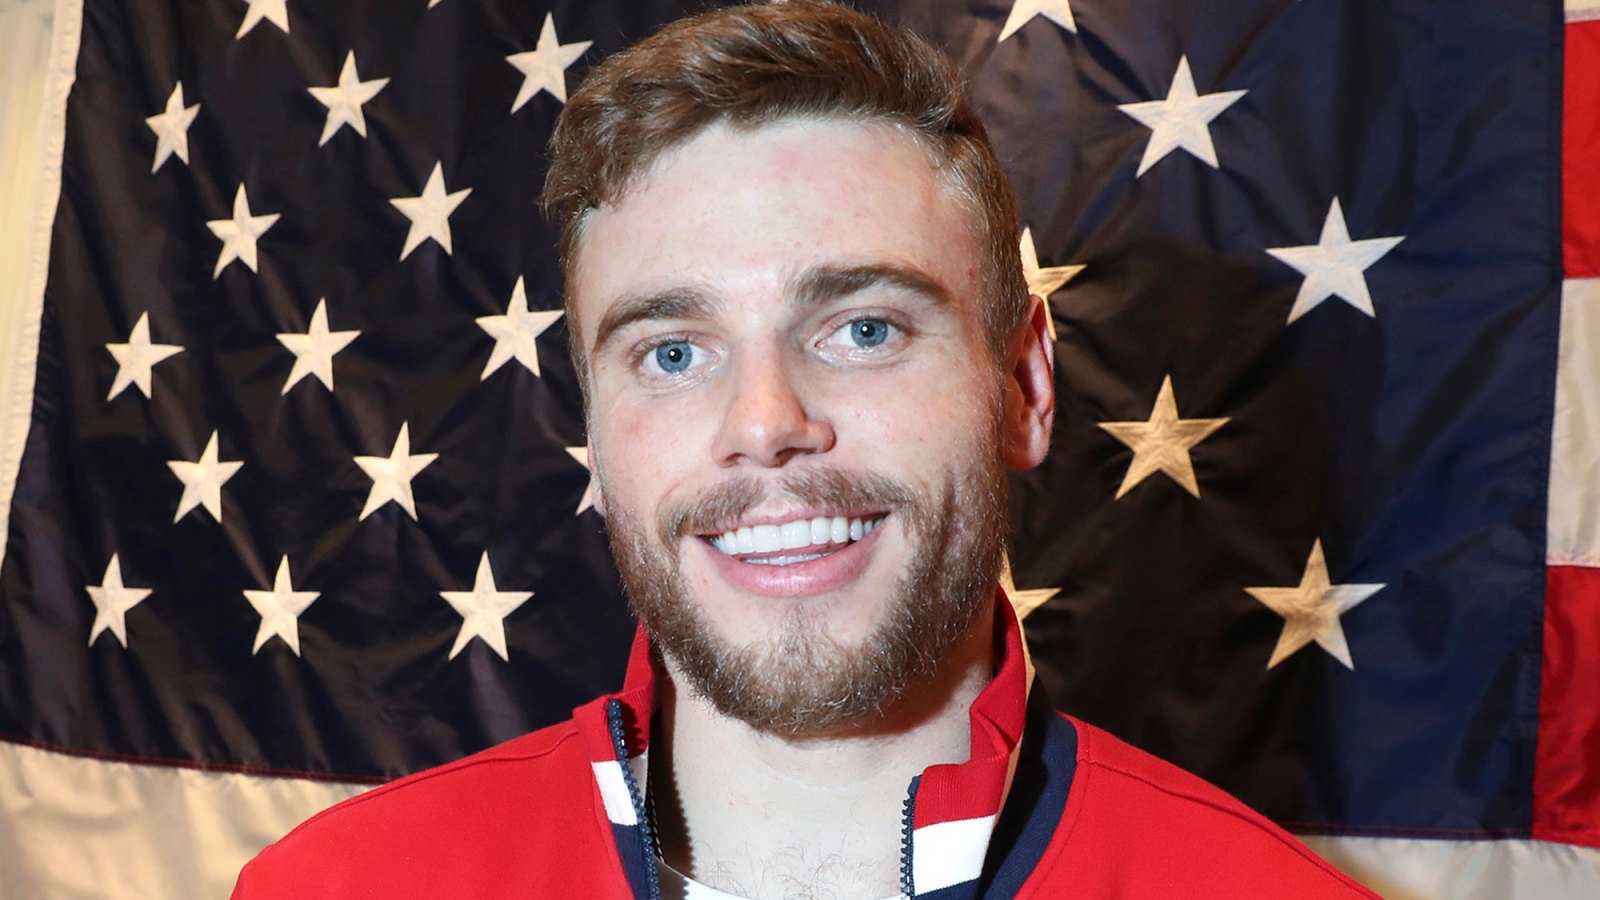 Gus Kenworthy to Represent Great Britain and Not the U.S. at 2020 Olympics in Honor of His Mom